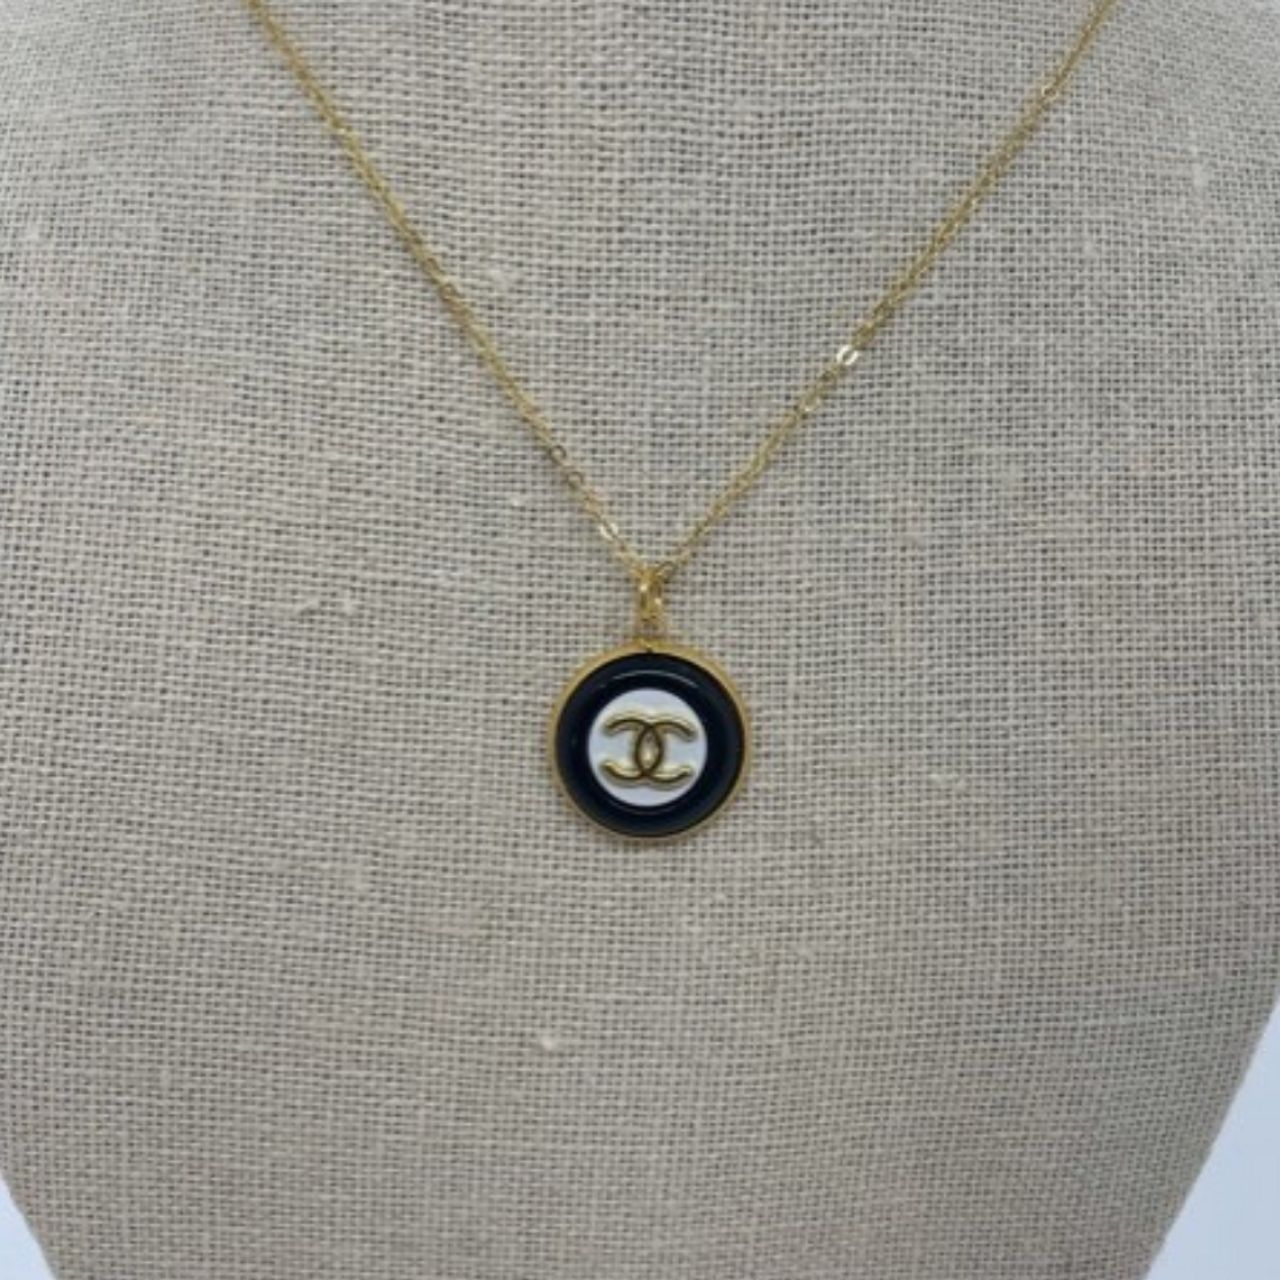 Vintage Chanel Necklaces for Sale at Auction  Coco Chanel Estate Jewelry